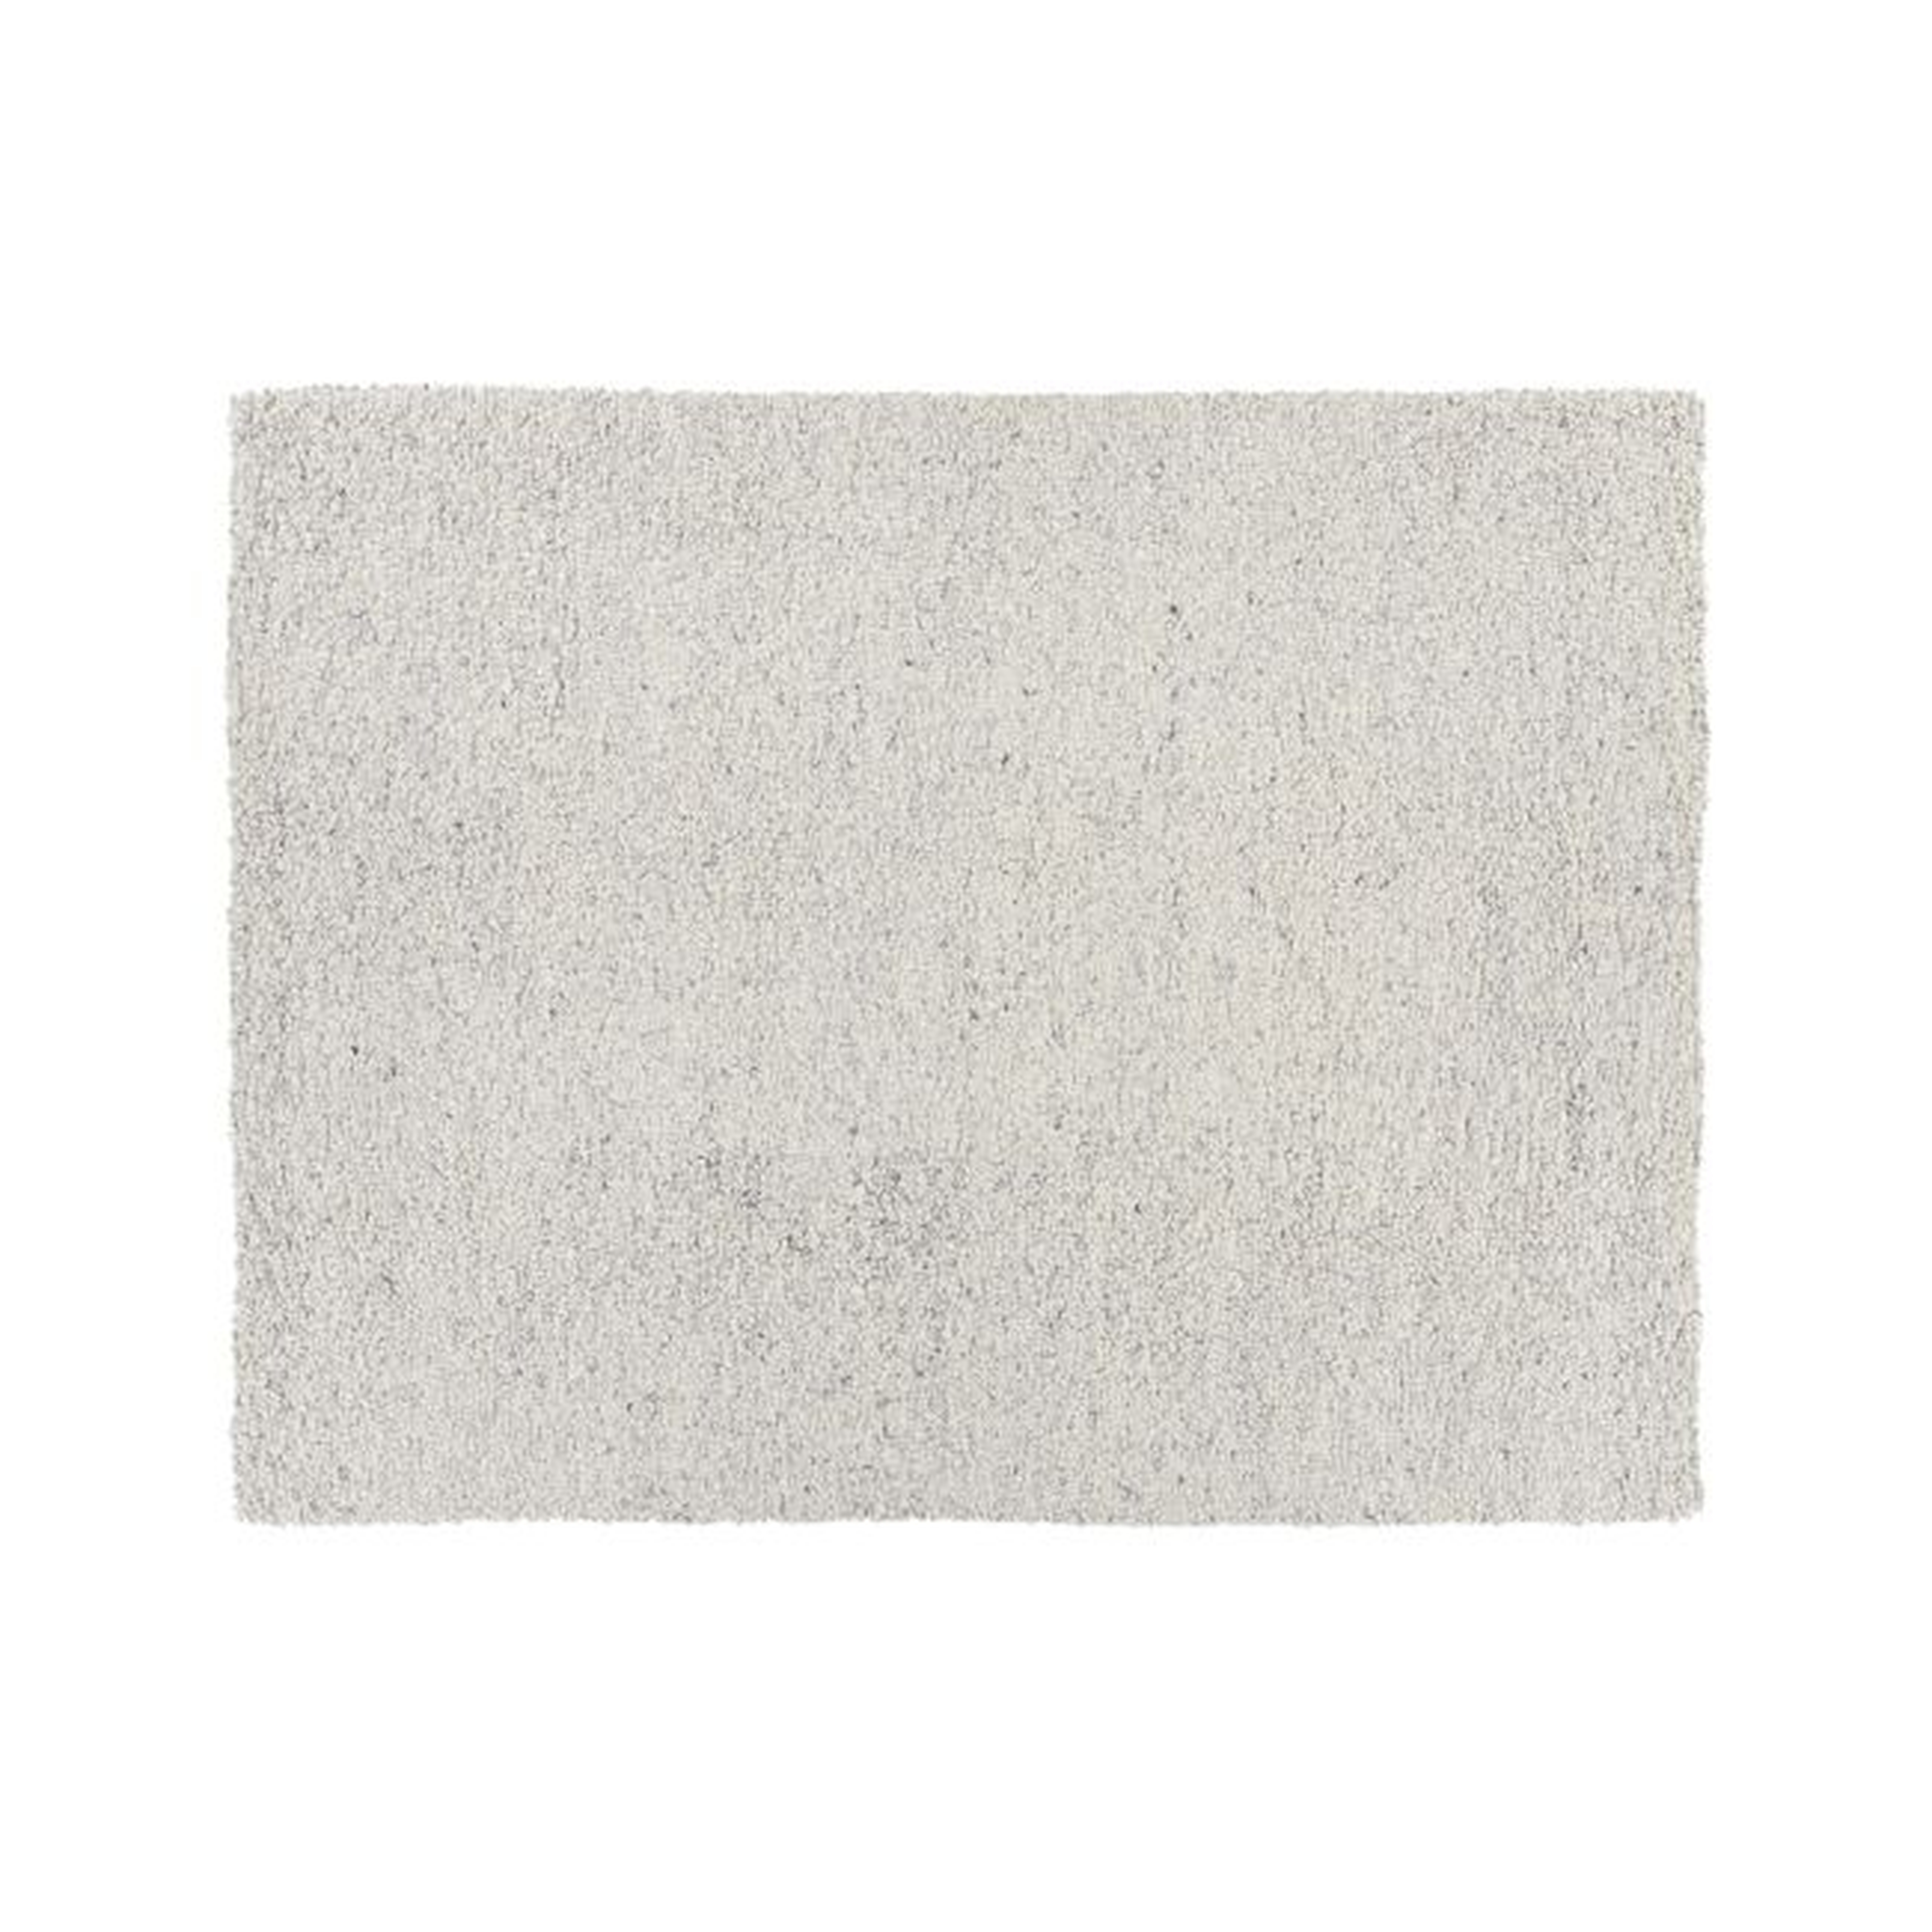 Siora Plush Wool Area Rug 8'x10' - Crate and Barrel